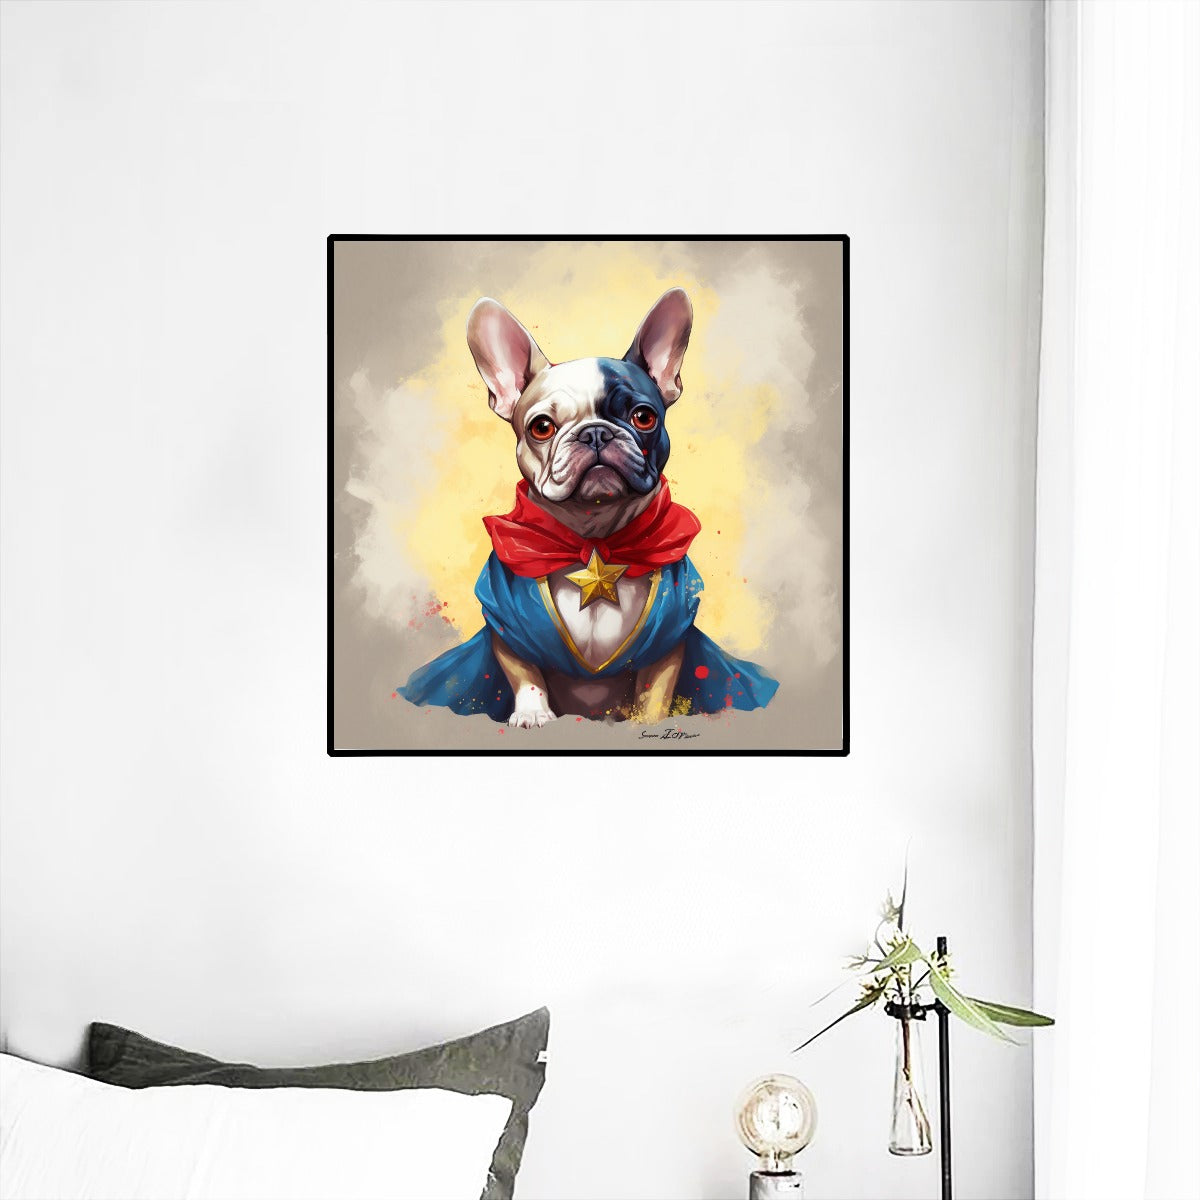 Powerful Frenchie Wall Mural - Energize Your Space